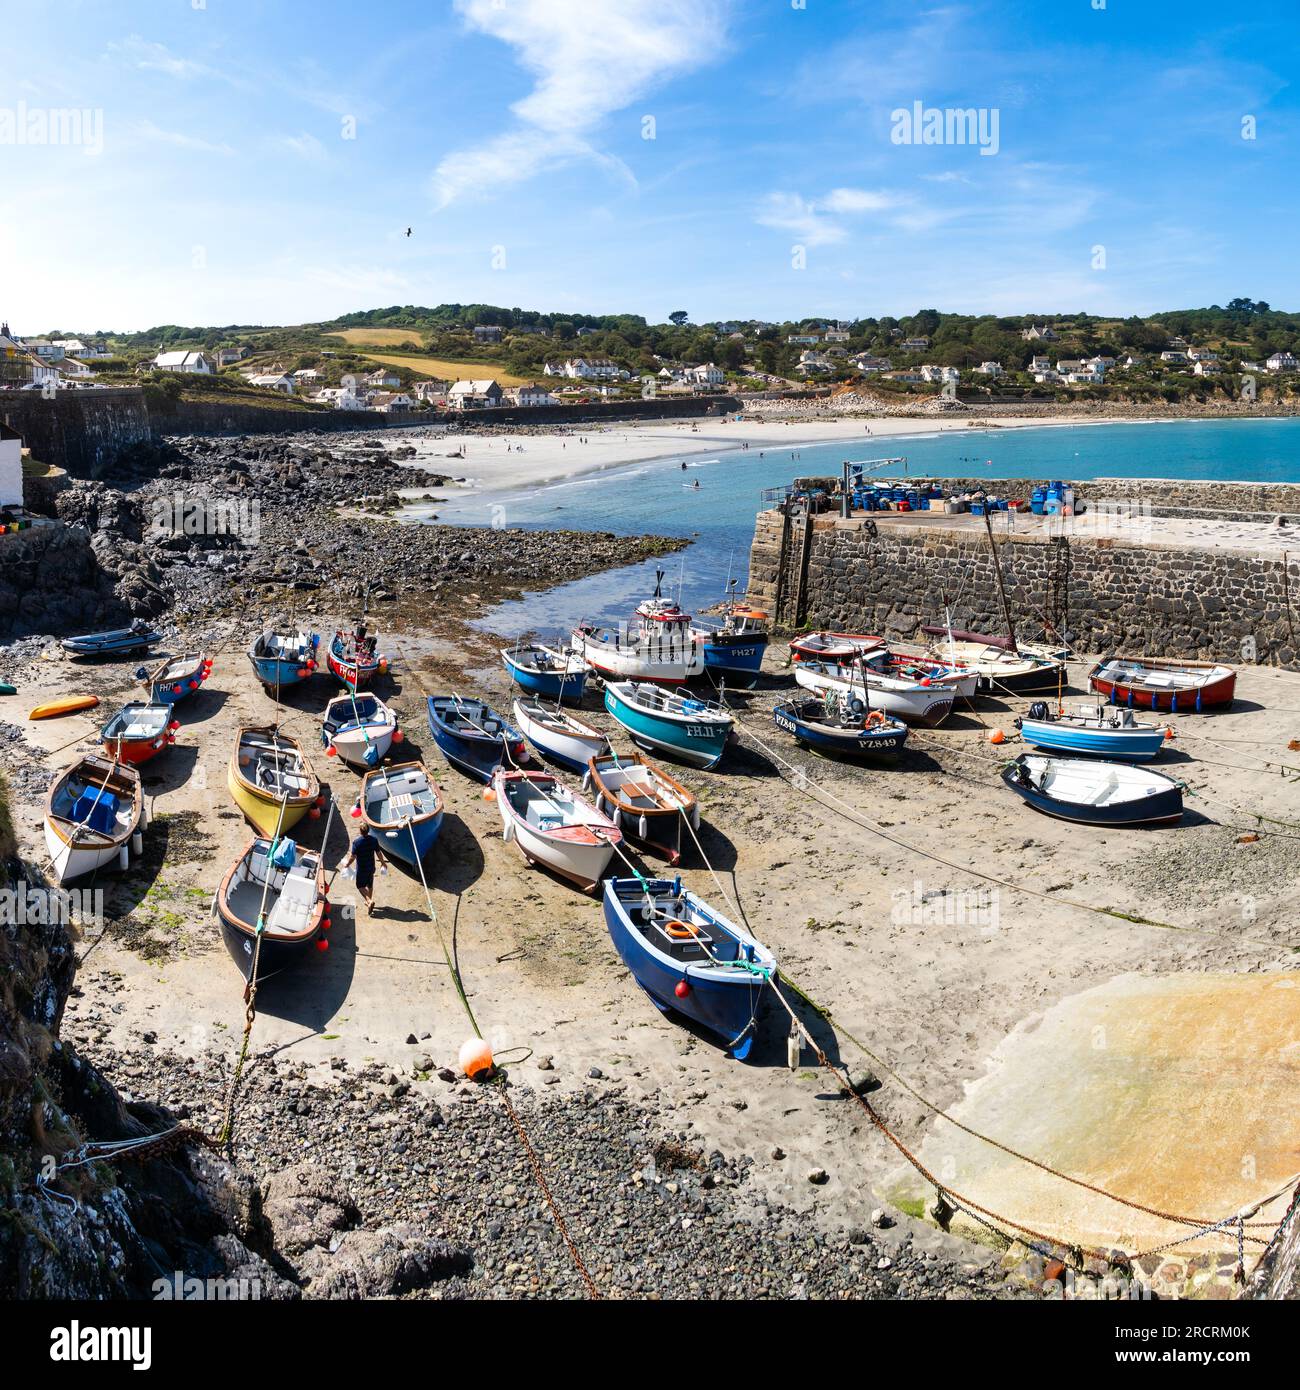 COVERACK, CORNWALL, UK - JULY 7, 2023.   Landscape view of traditional Cornish fishing boats moored in the tidal harbour of the quaint fishing village Stock Photo